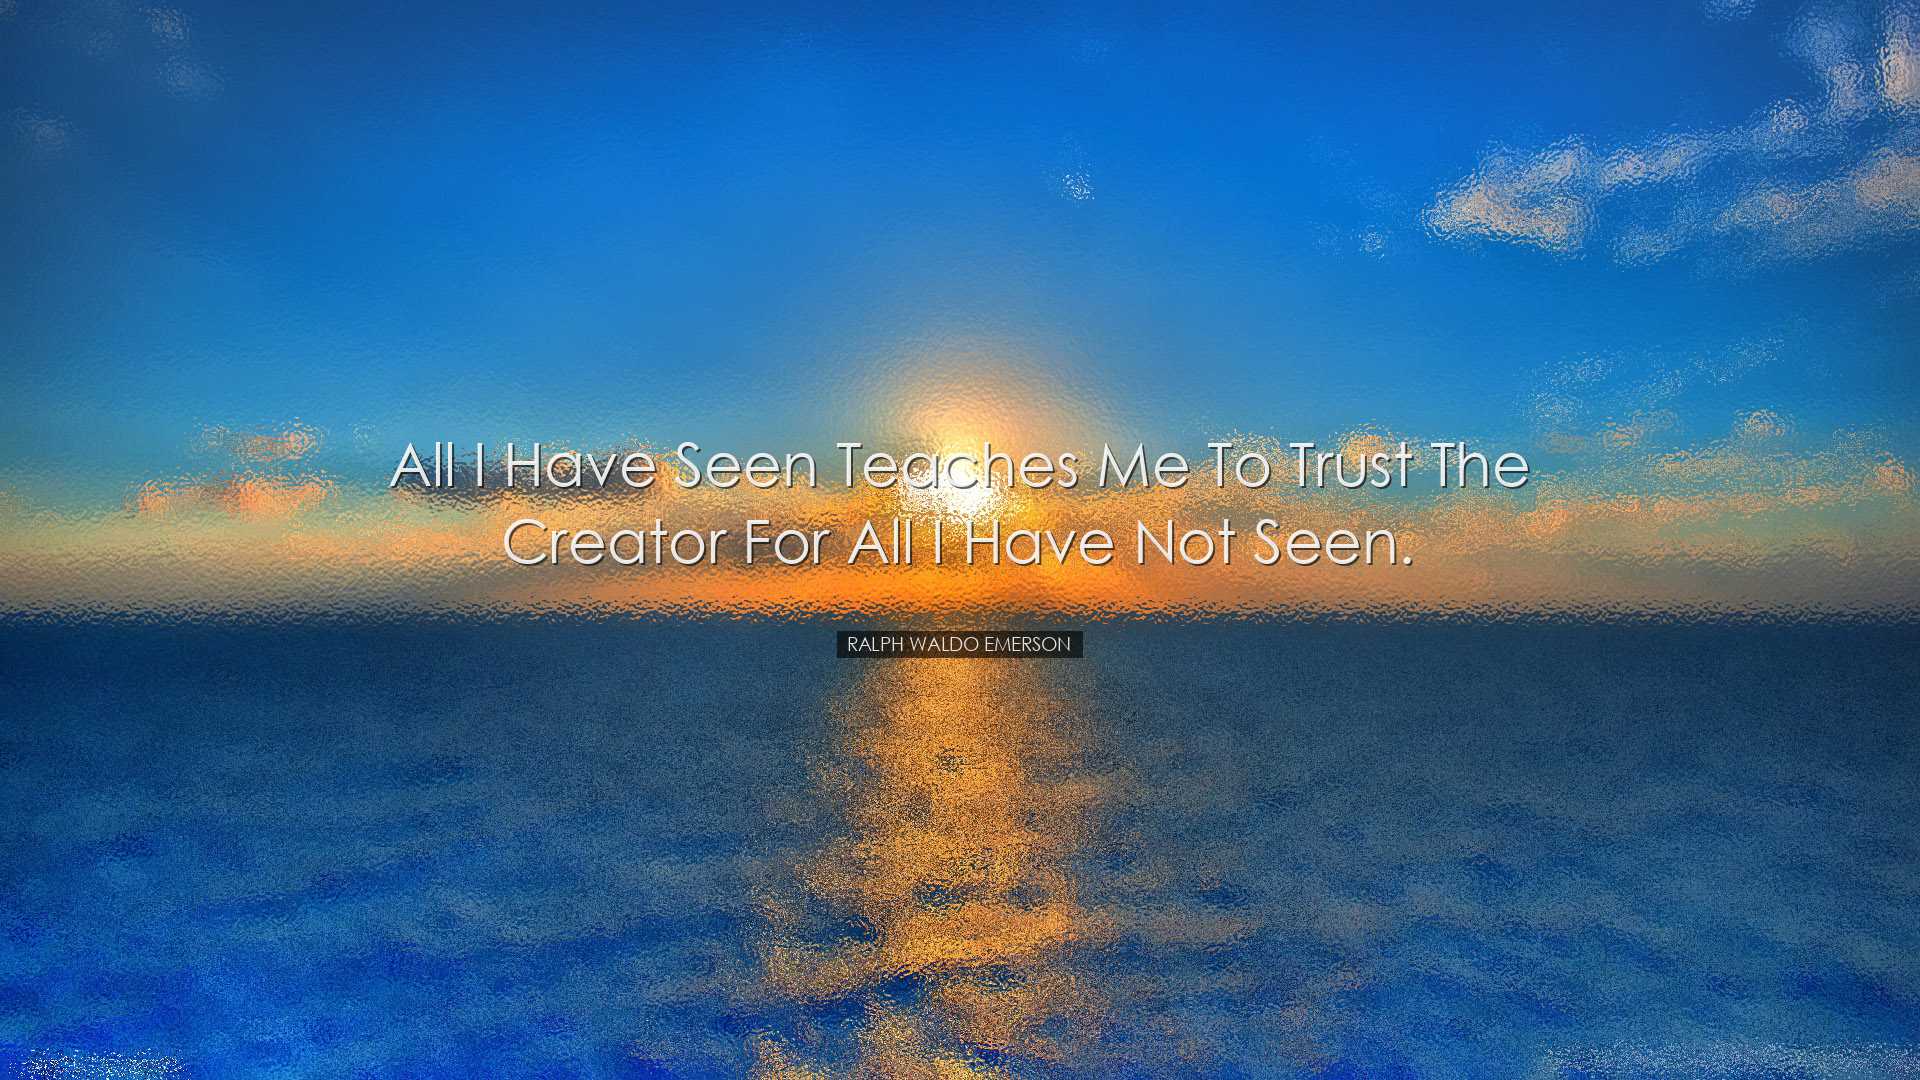 All I have seen teaches me to trust the creator for all I have not